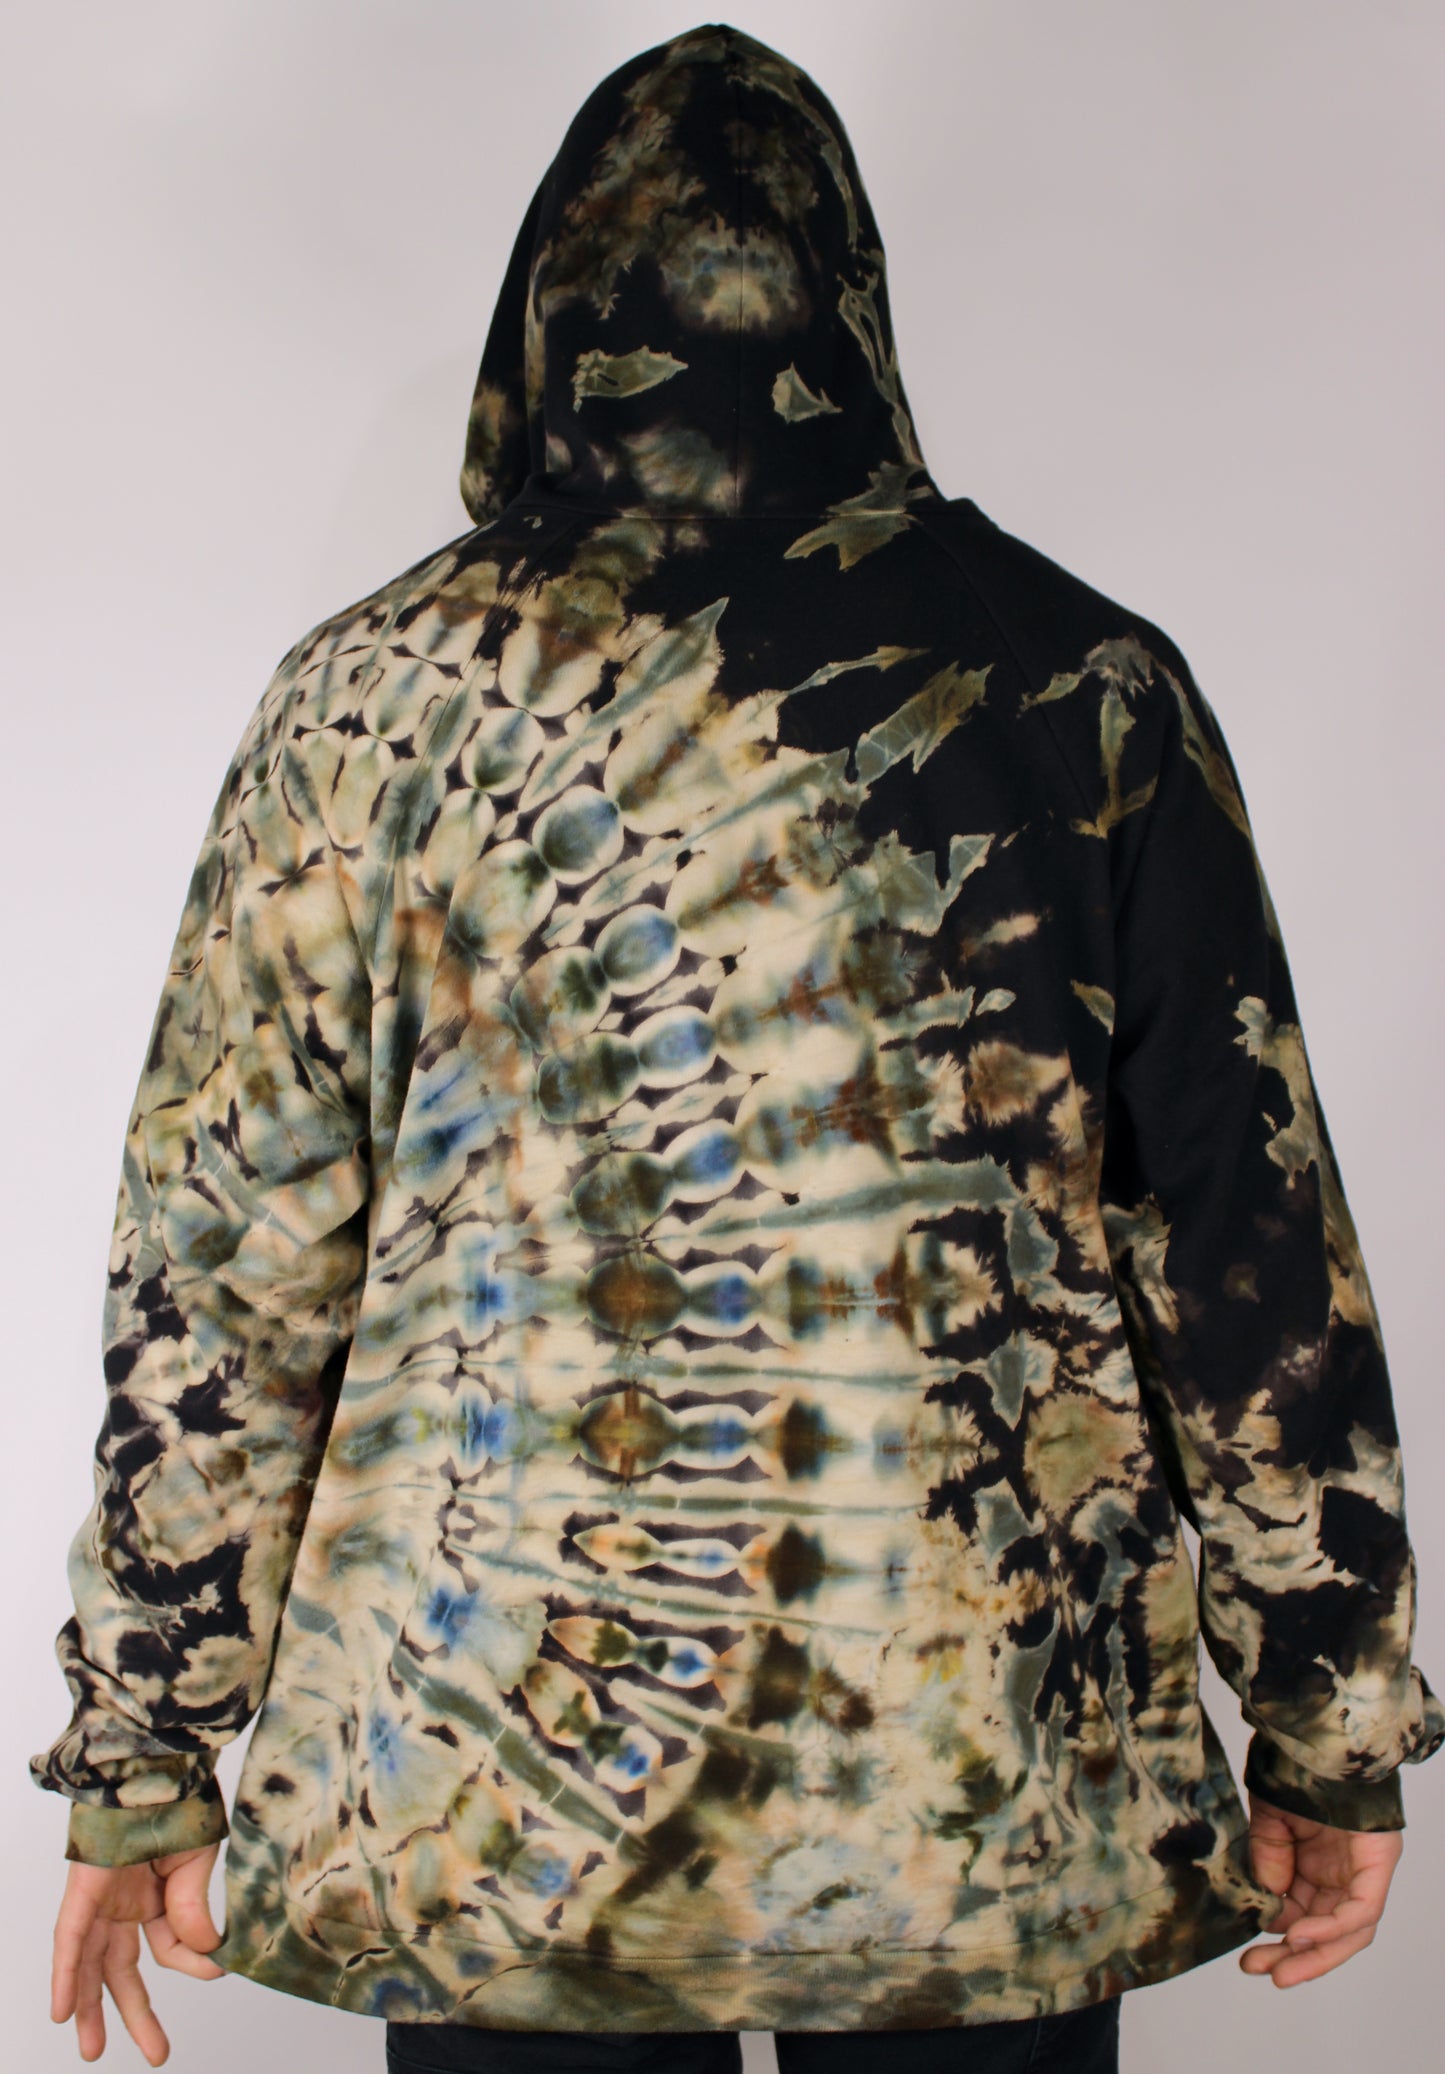 2XL - "Gears of Time" Pullover Reverse Dyed Hoodie